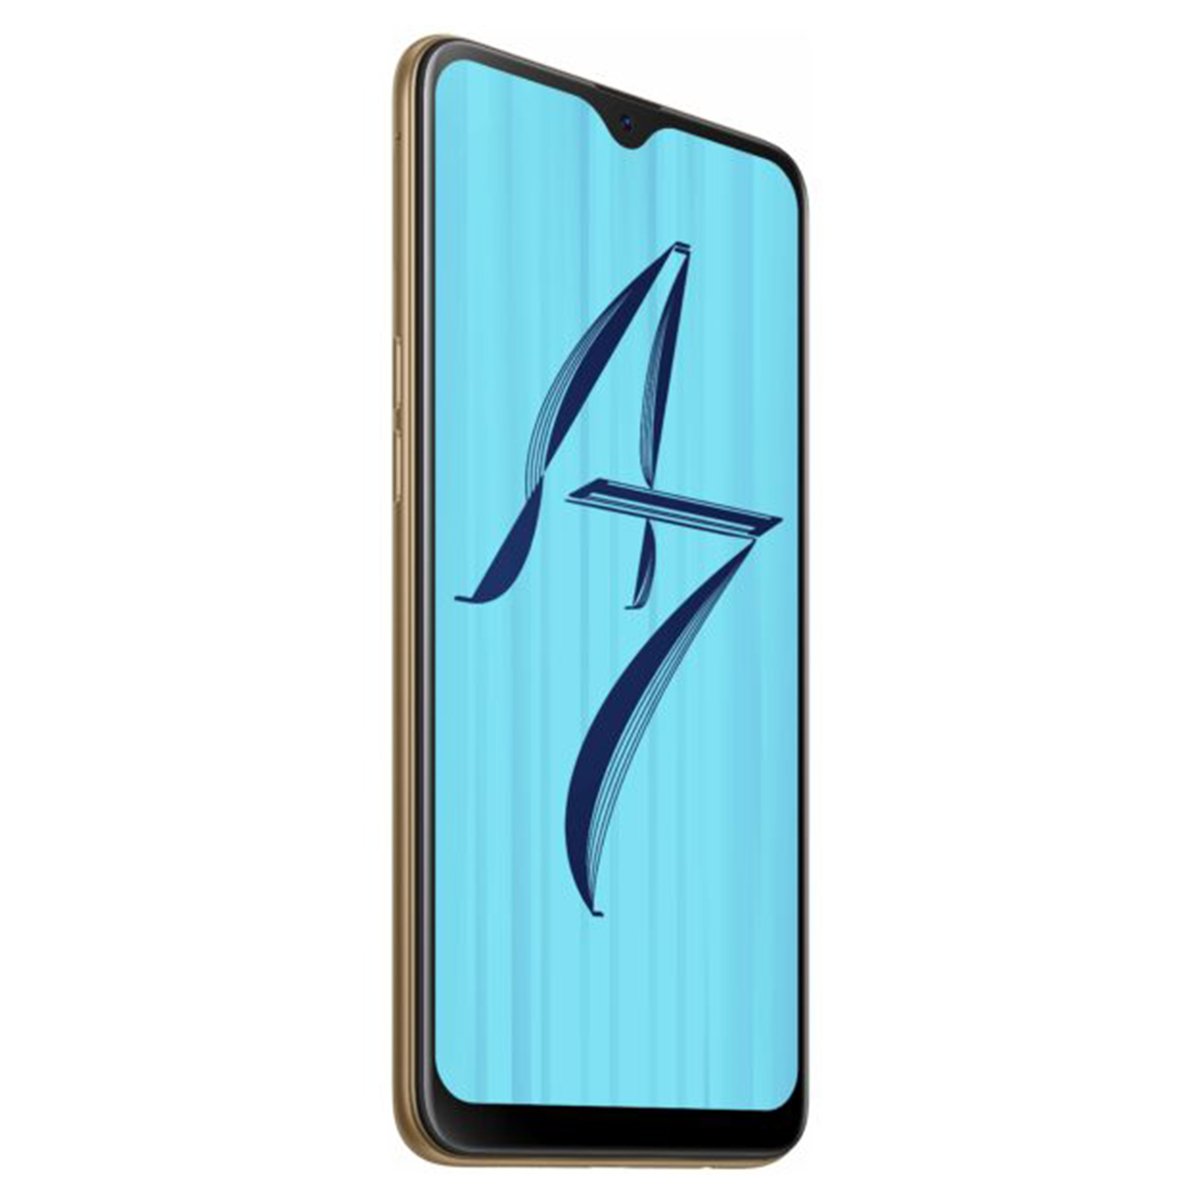 Oppo A7 64GB Dazzling Gold